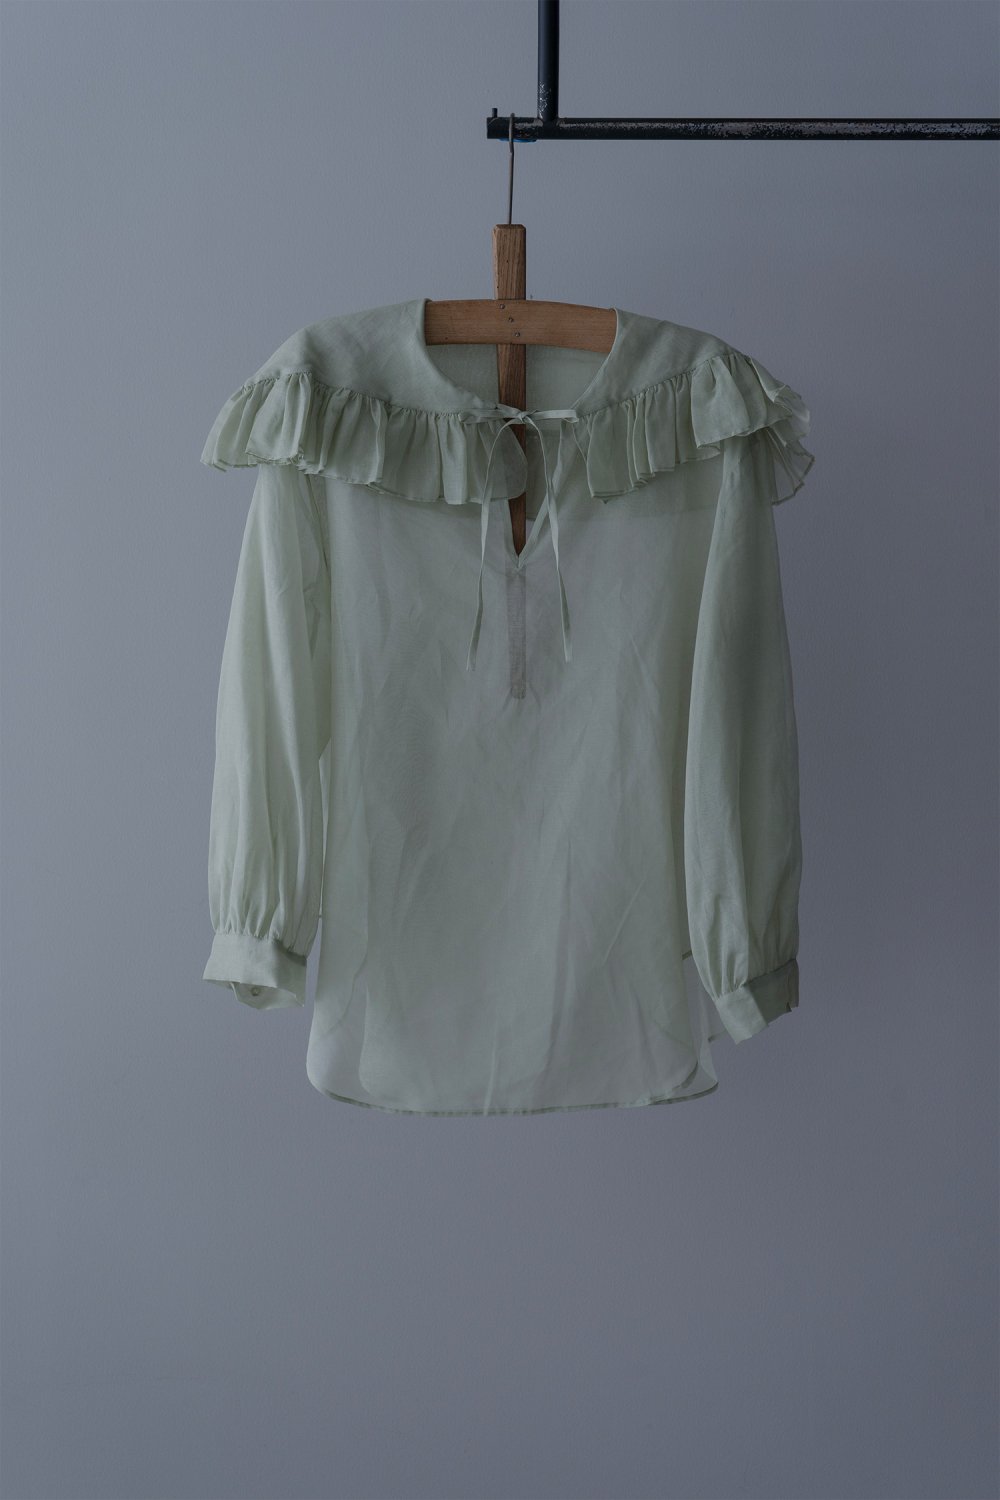 Heriter Organdy Frill Color Blouse ( Sage Green )